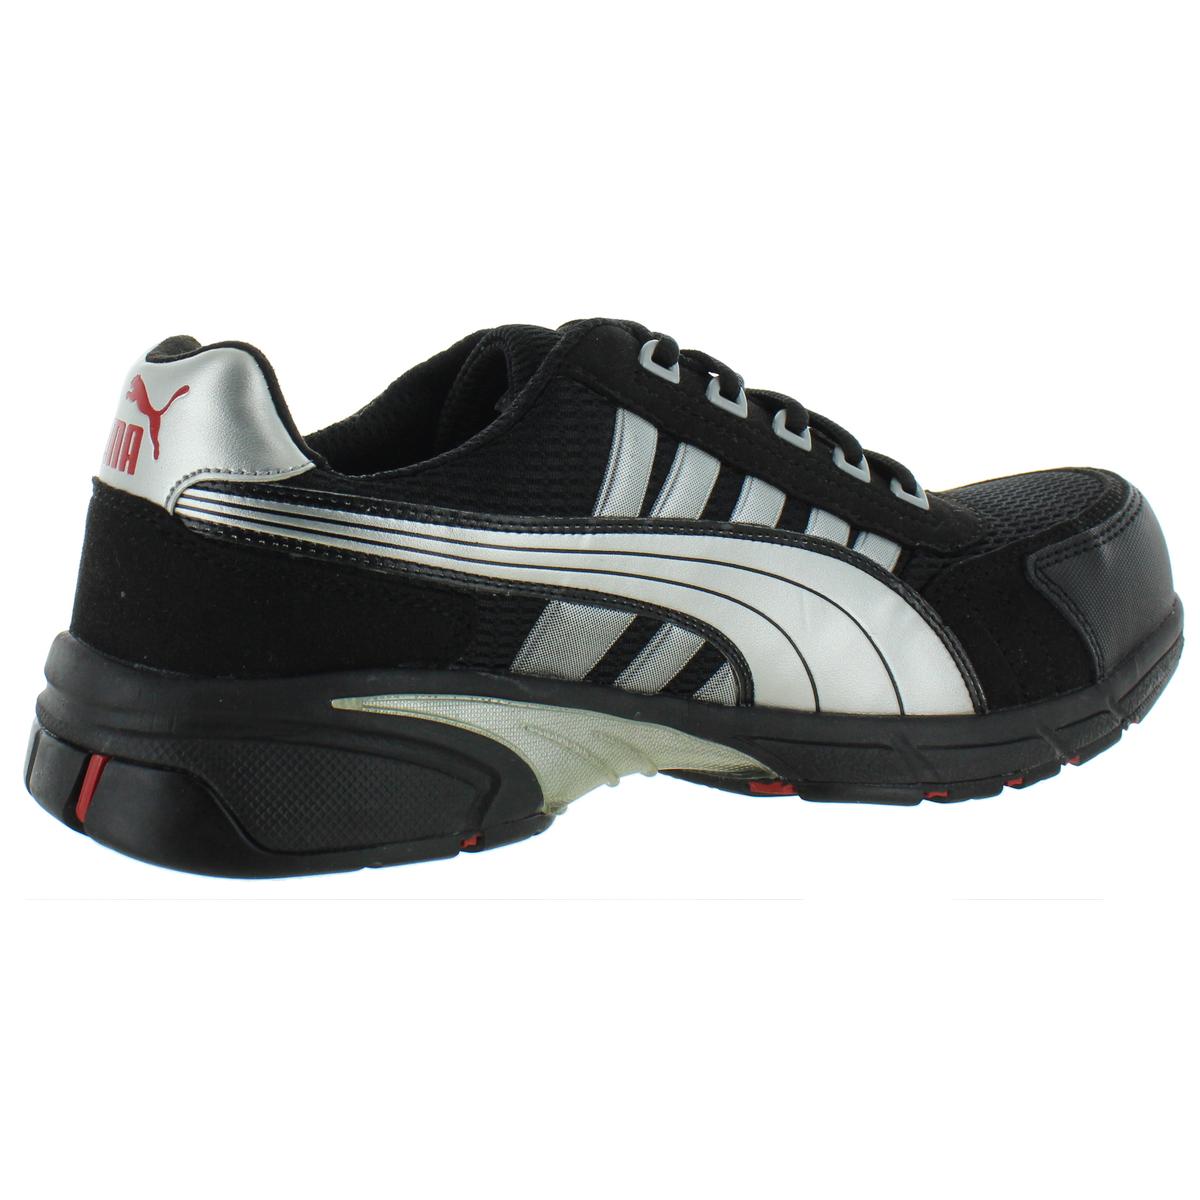 Puma Mens Mesh Composite Toe Trainers Safety Shoes Sneakers BHFO 8680 ...